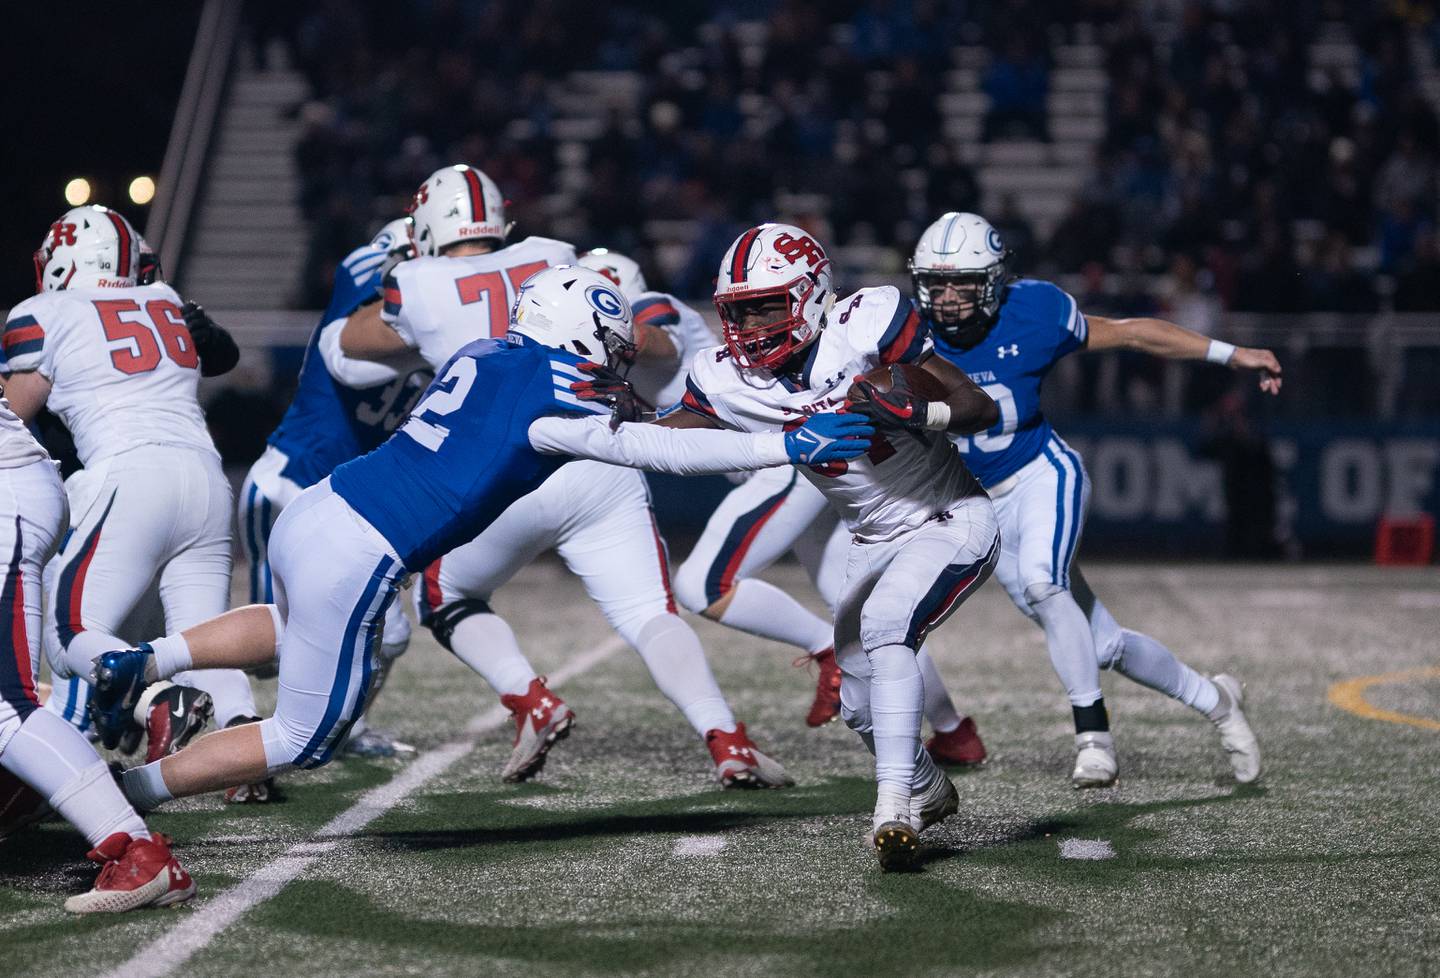 St. Rita's Ethan Middleton (84) carries the ball against Geneva during a 7A state football playoff game at Geneva High School on Friday, Nov 5, 2021.